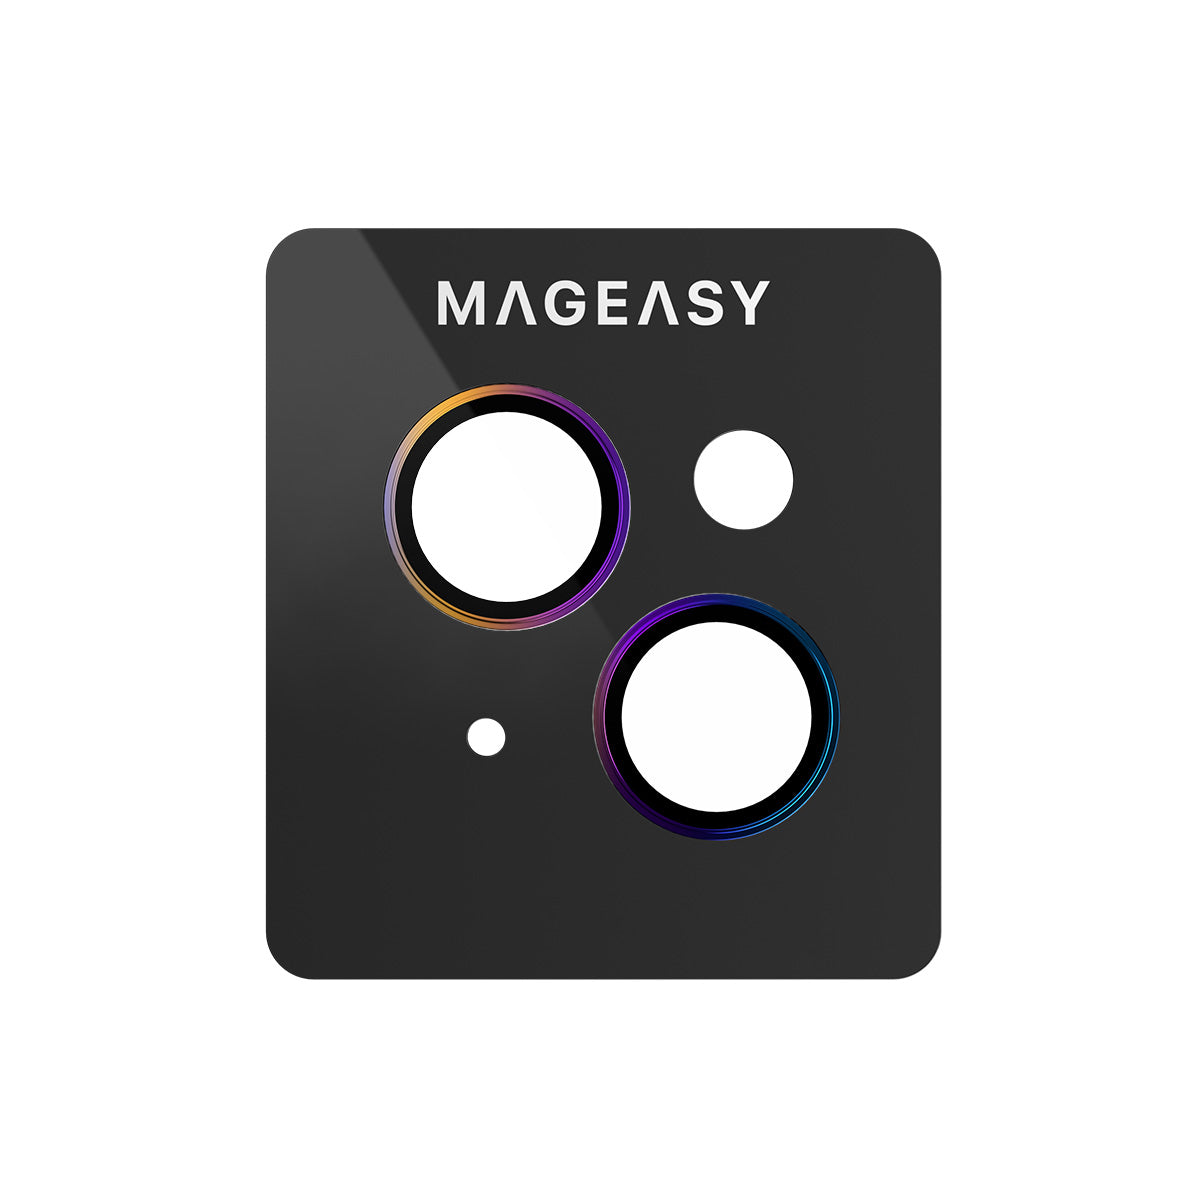 MagEasy LENZGUARD Sapphire Lens Protector for iPhone 15 Series